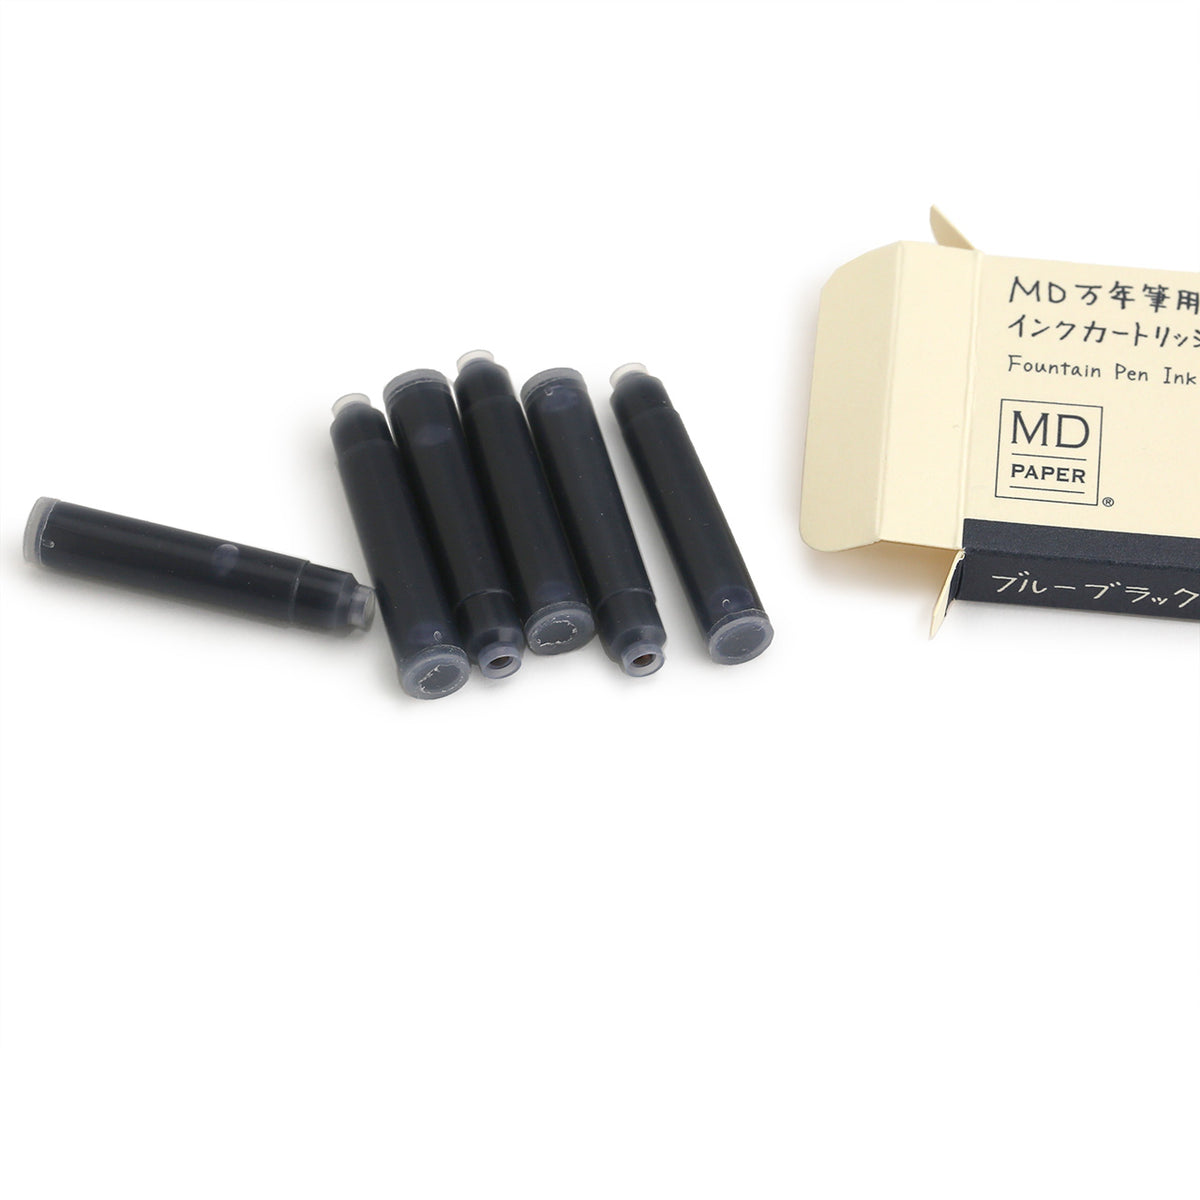 6 Midori fountain pen blue-black ink cartridges are in the small pack